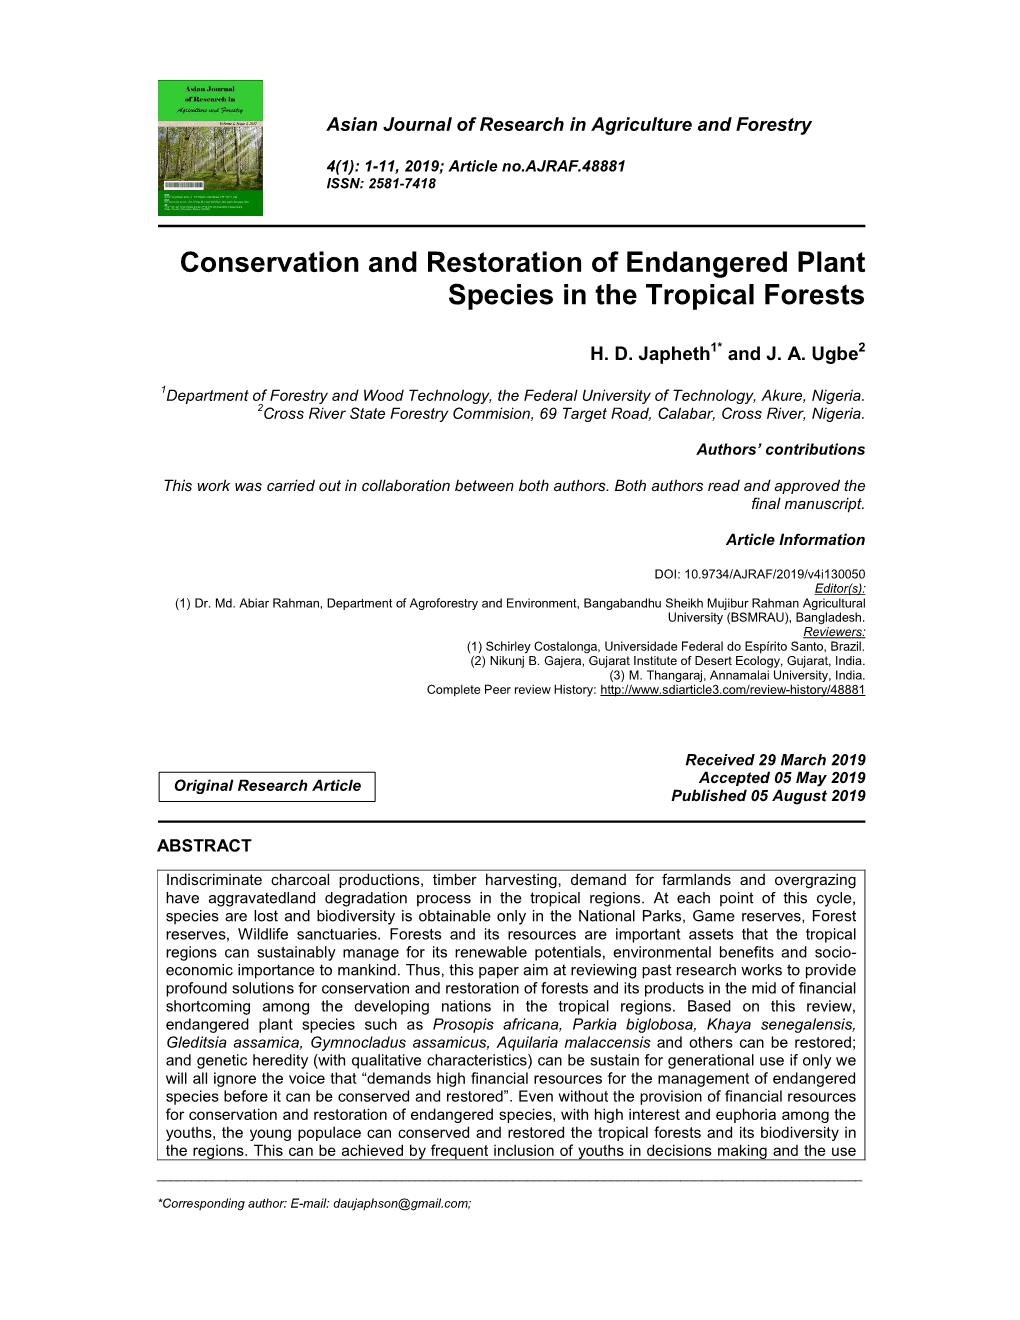 Conservation and Restoration of Endangered Plant Species in the Tropical Forests